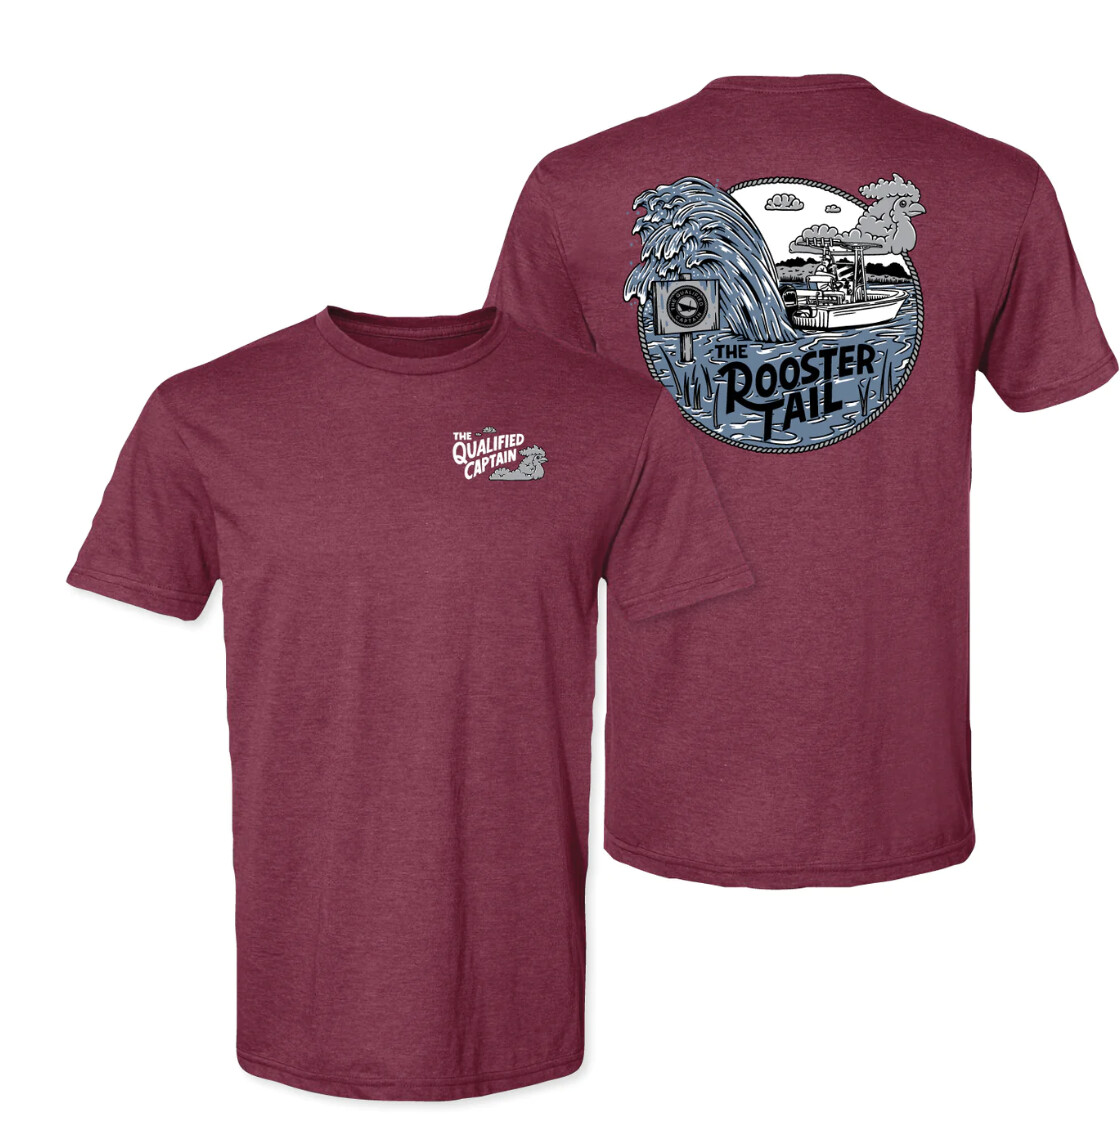 The Qualified Captain Rooster Tail Tee Maroon